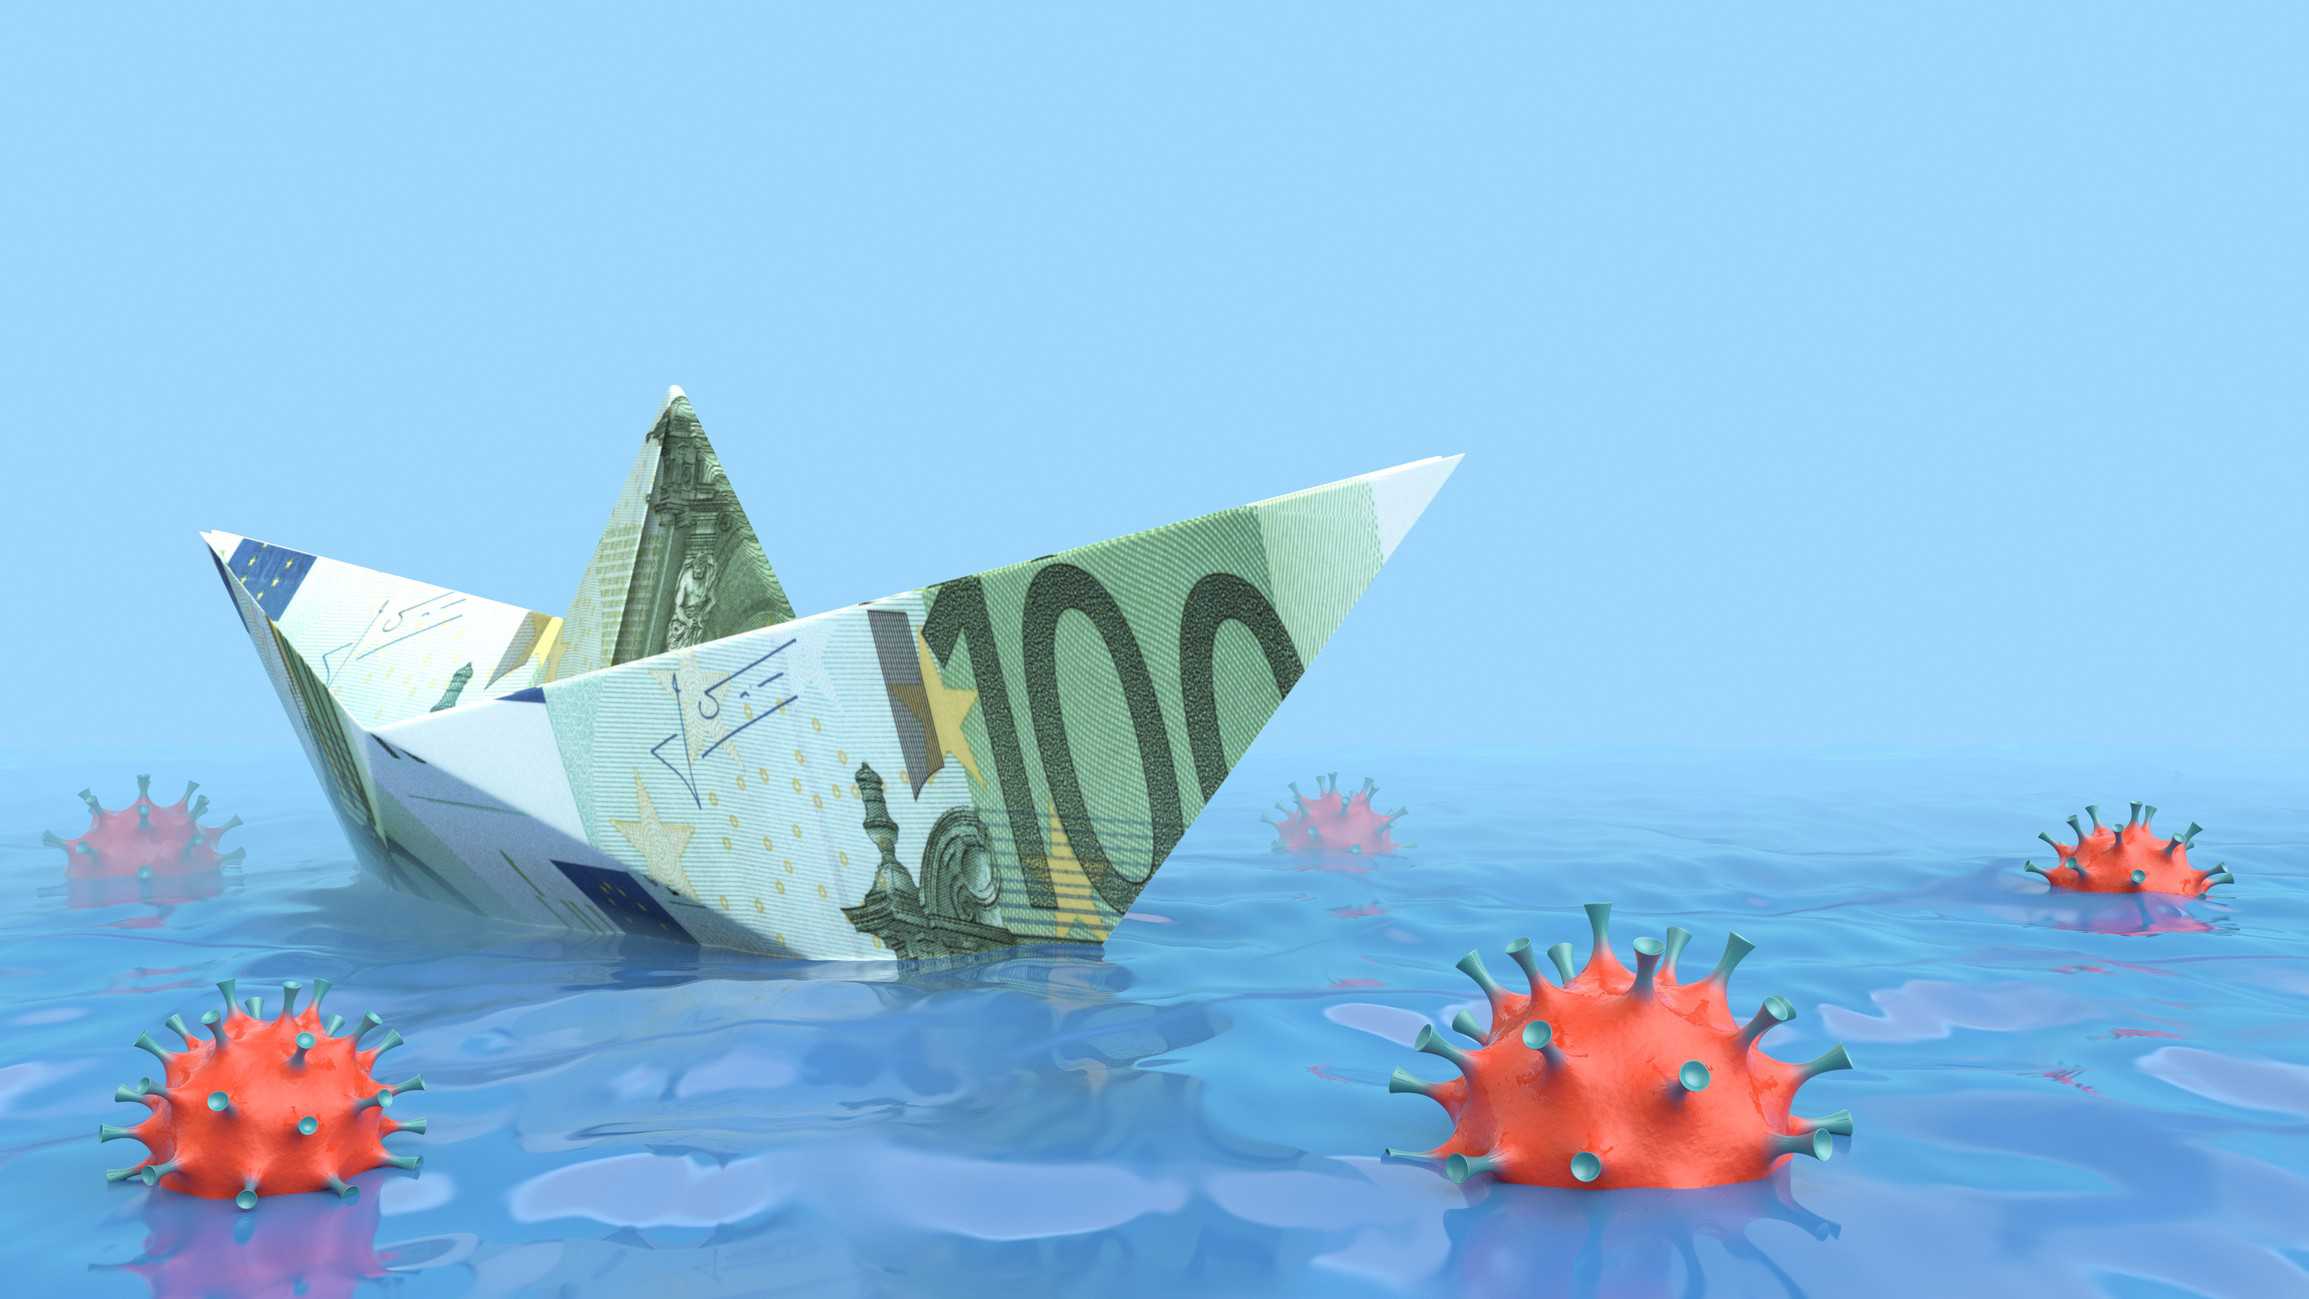 ASX shares and ETF representing by paper boat made from one hundred dollar note floating on sea containing covid bugs